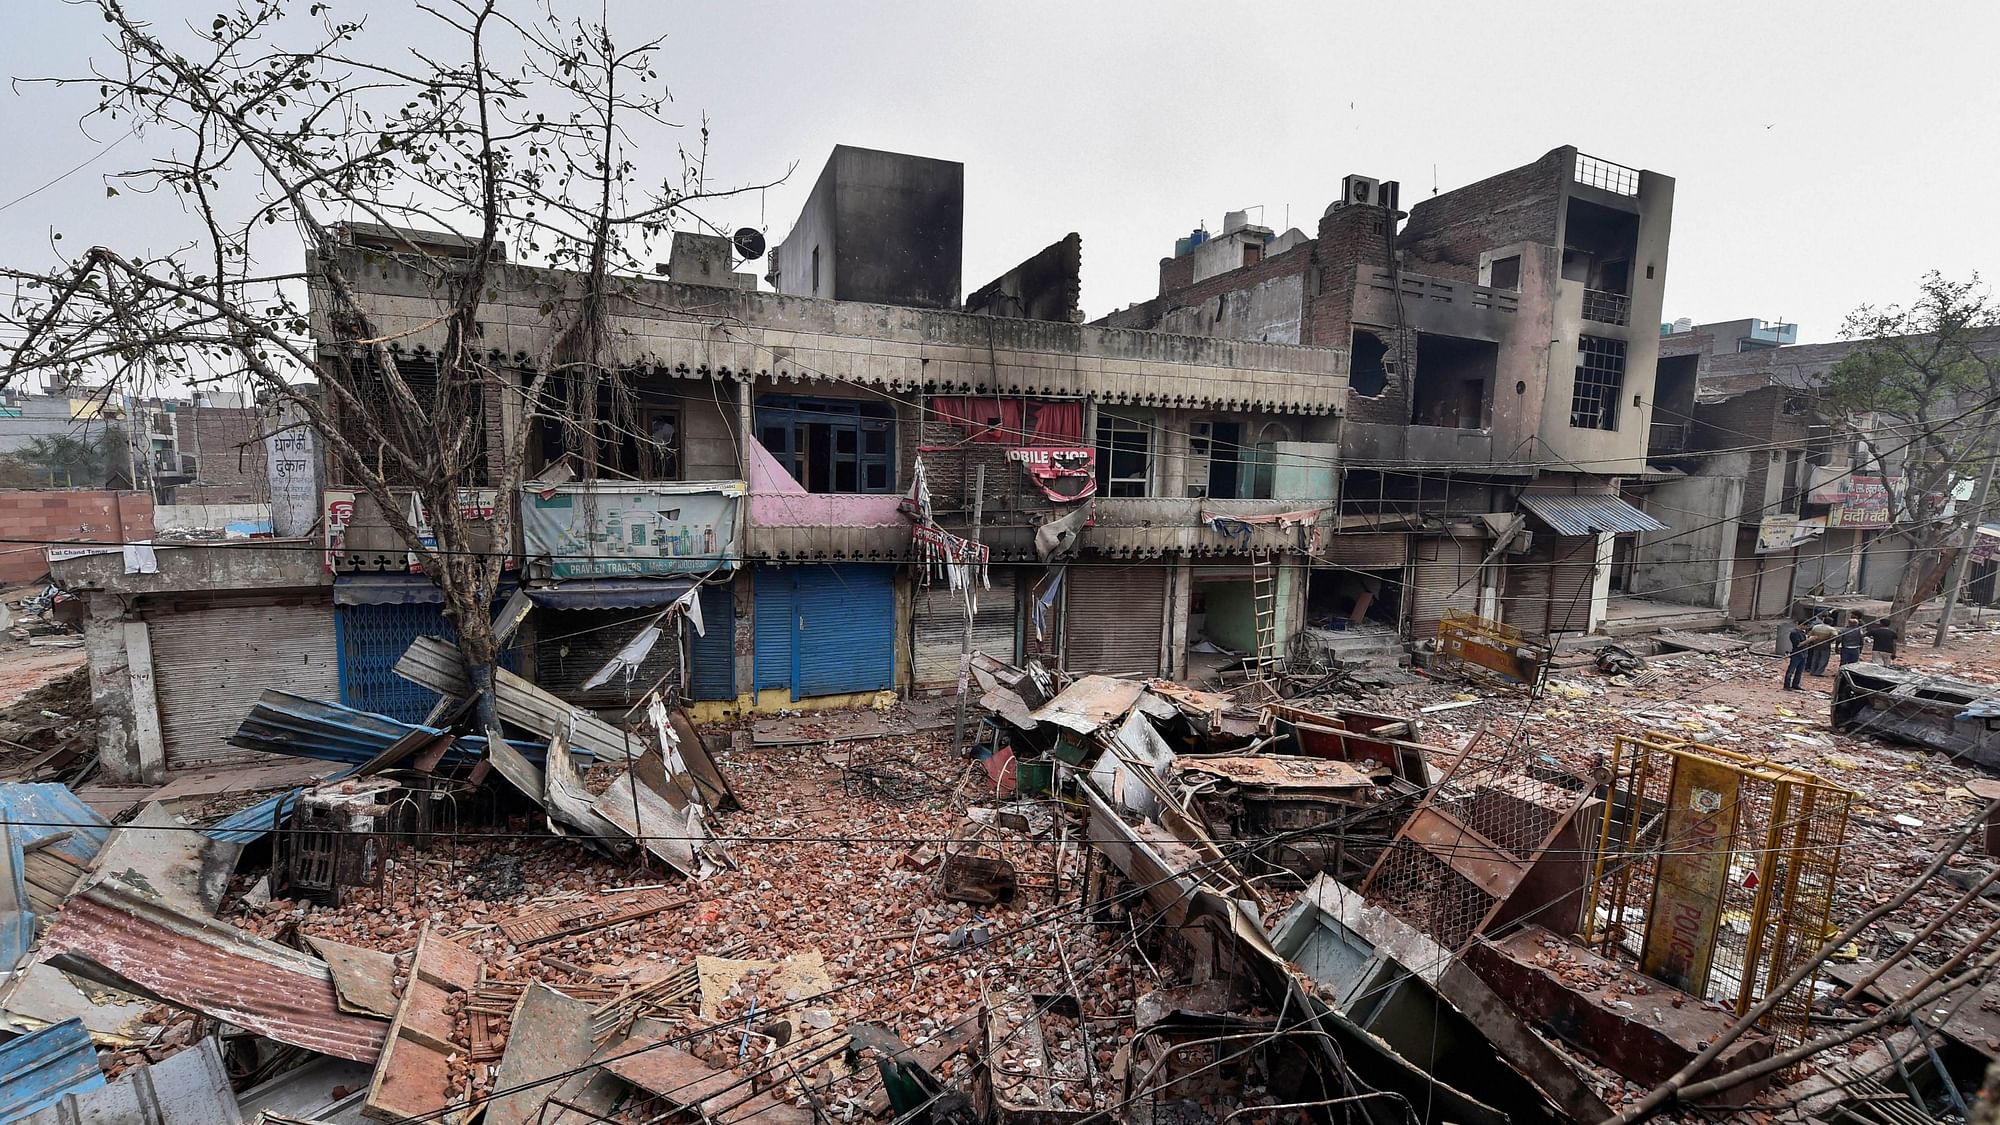 Communal violence erupted in northeast Delhi late in February, leaving at least 52 people dead.